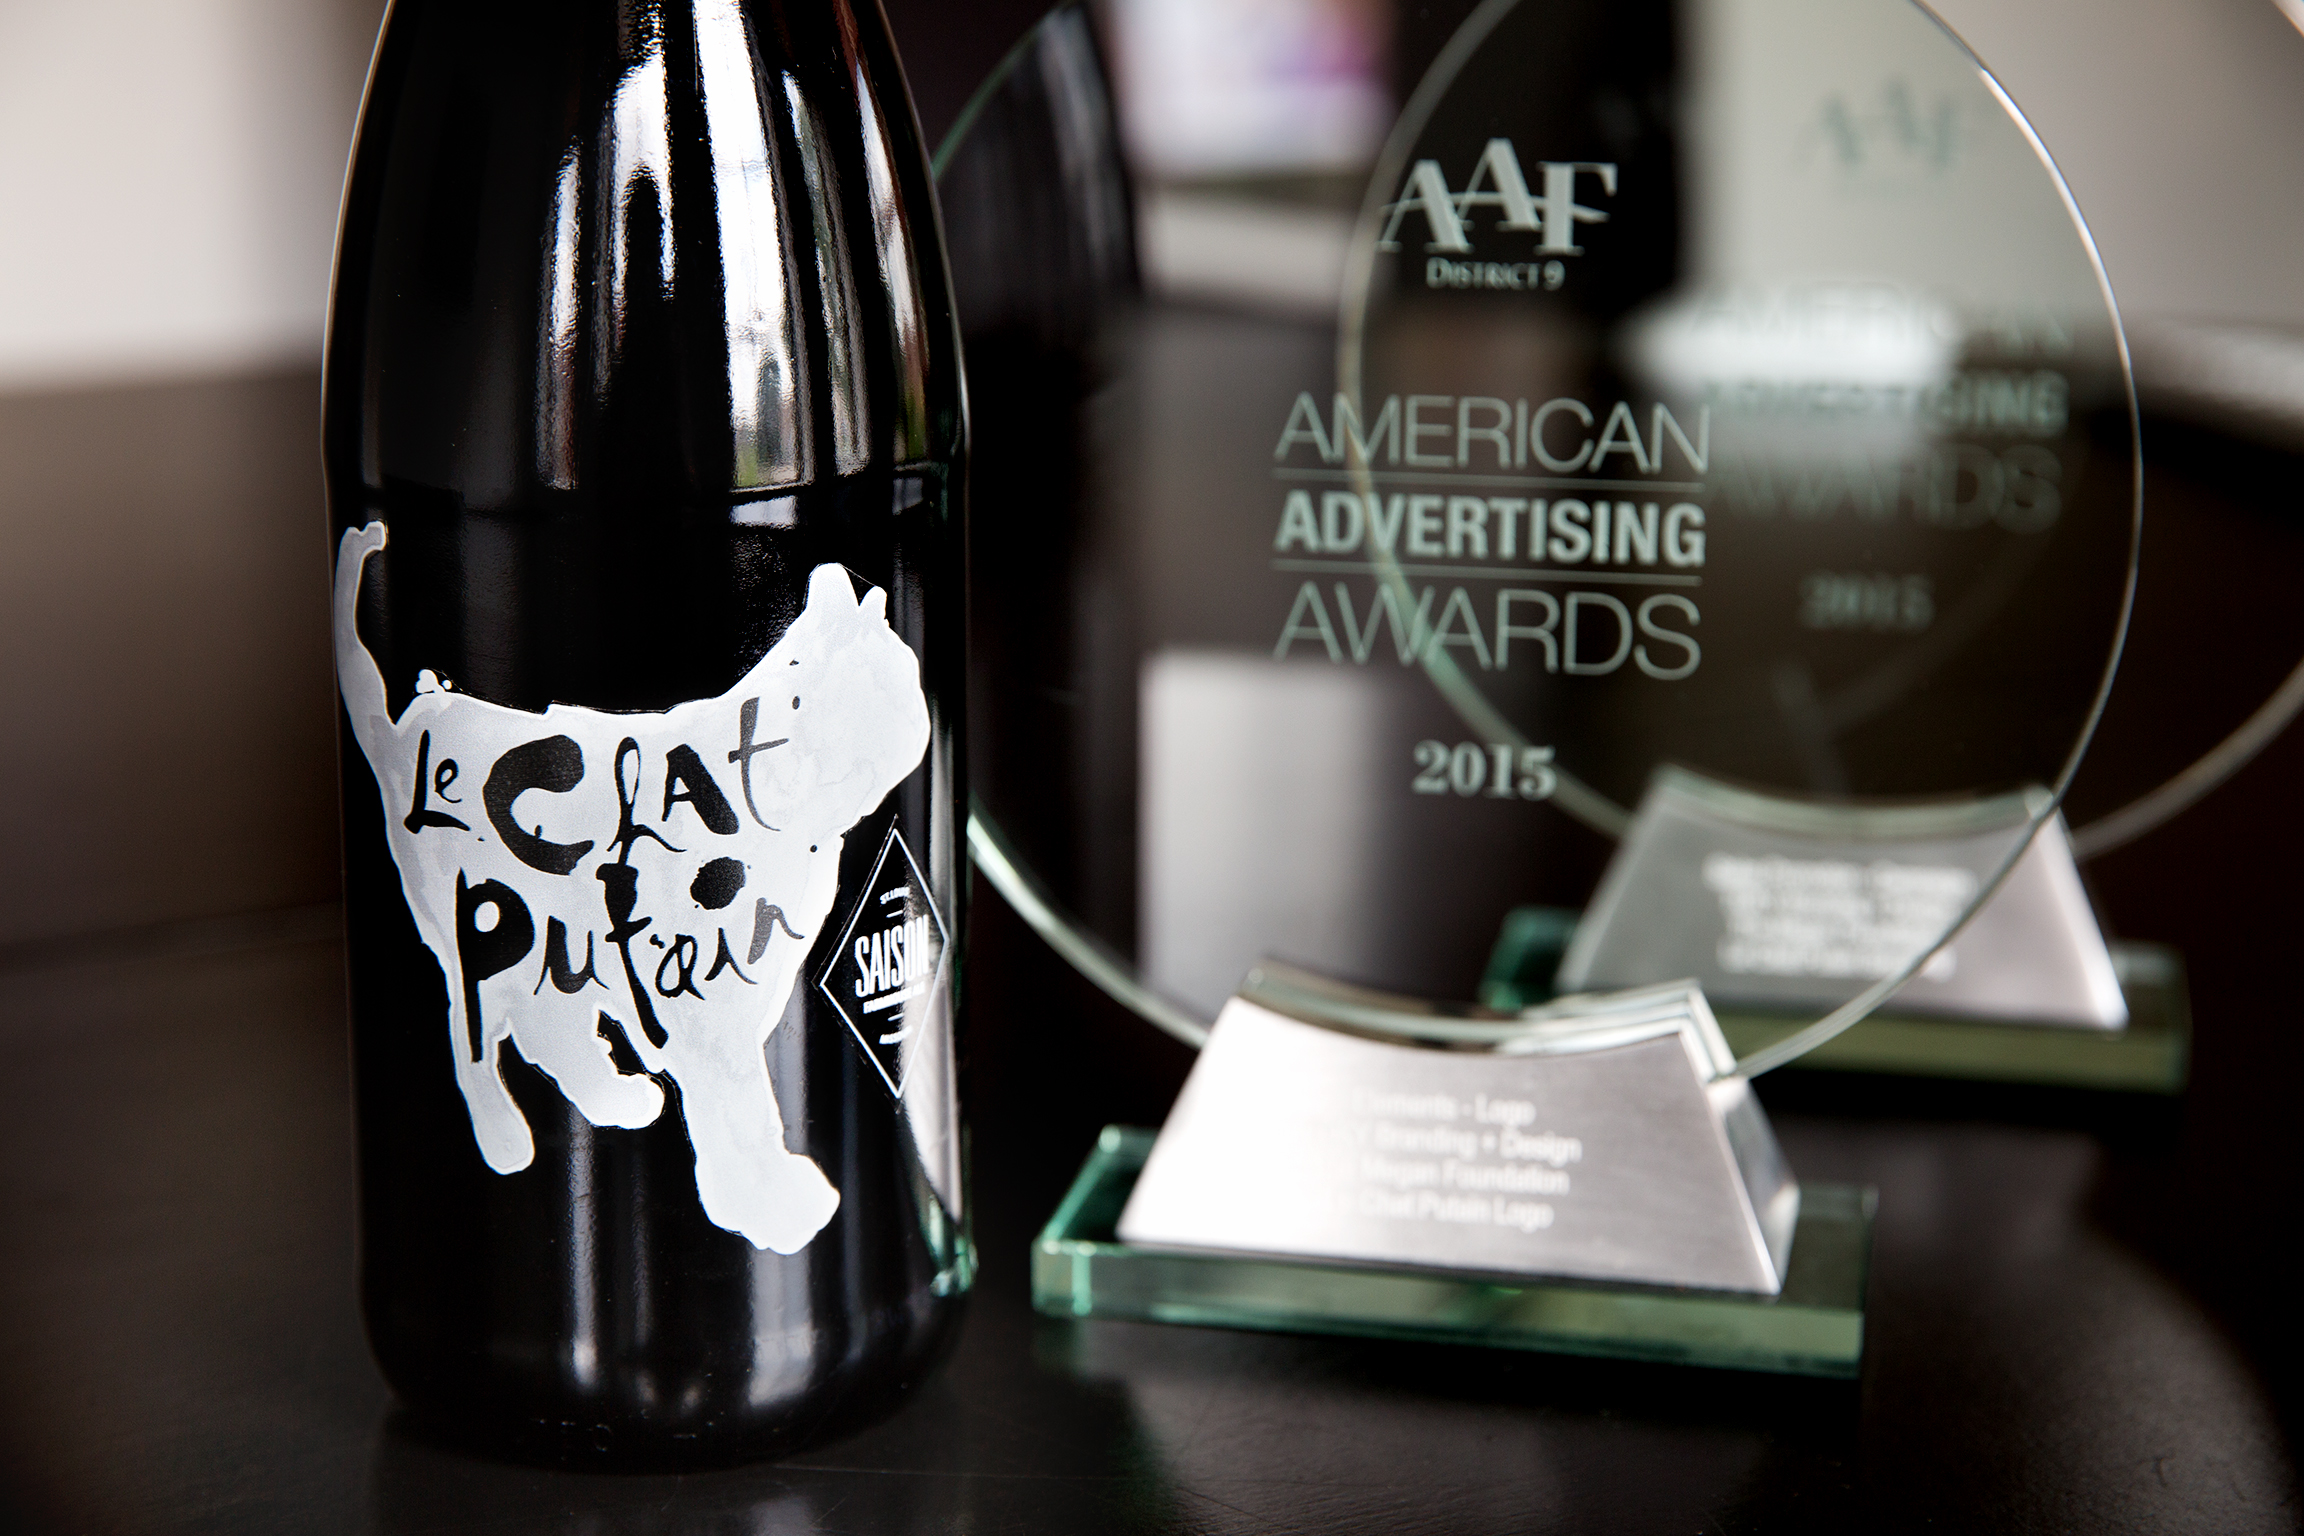 le chat putain district ADDY awards